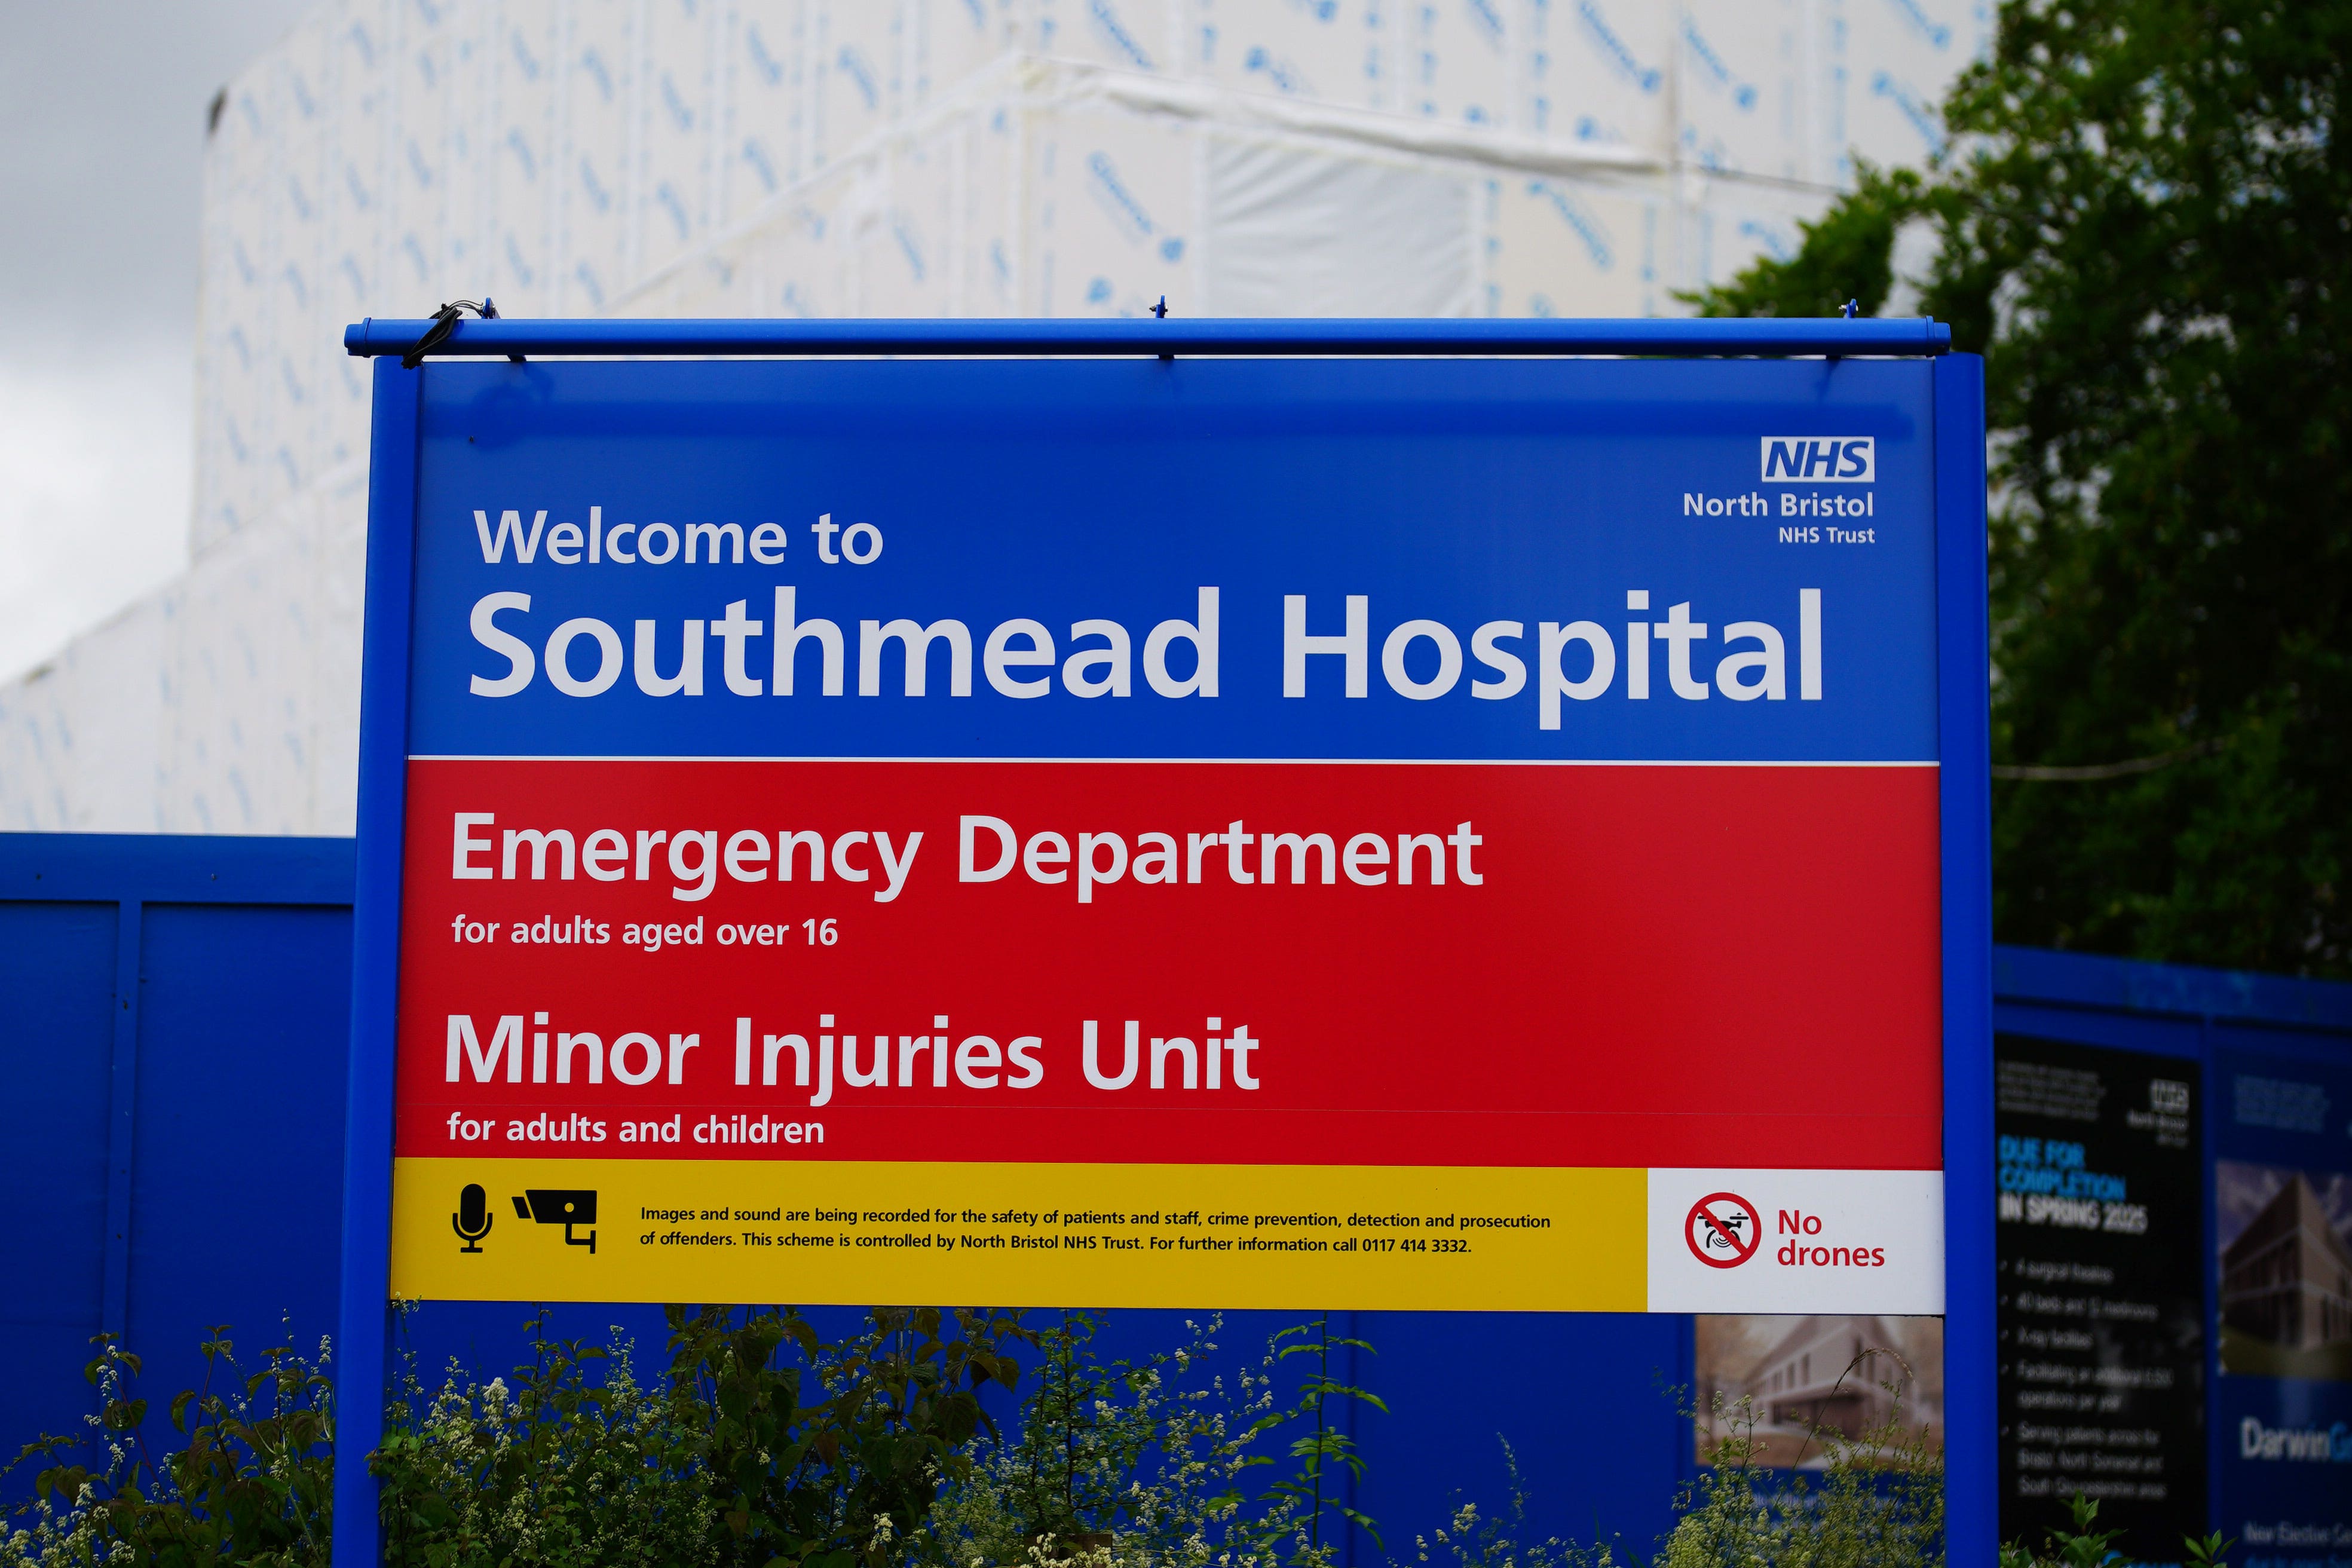 Southmead Hospital in Bristol where the Princess Royal is being treated after she ‘sustained minor injuries and concussion’ following an incident on the Gatcombe Park estate on Sunday evening (Ben Birchall/PA)